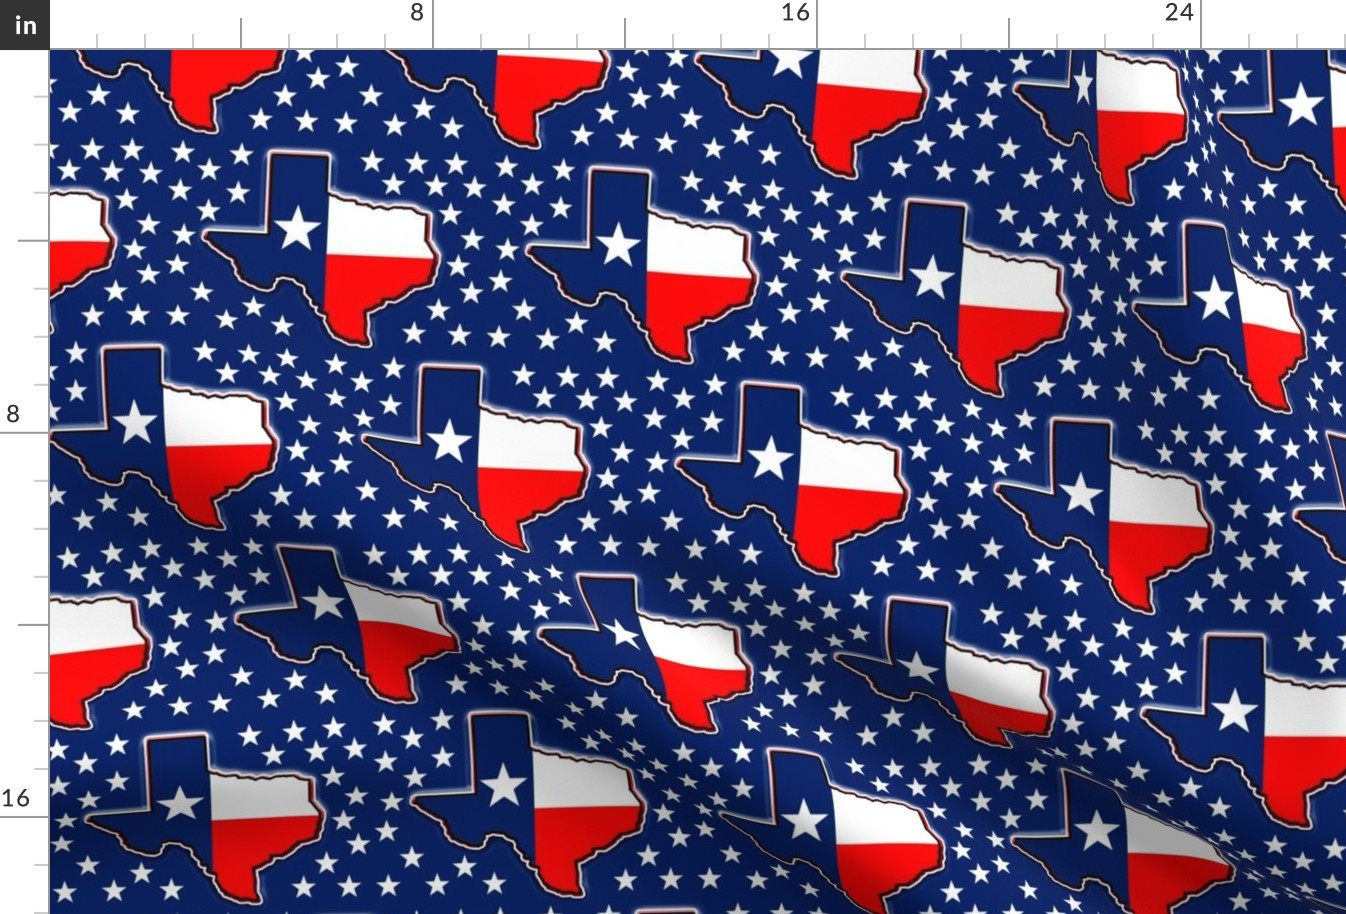 lone star state with stars